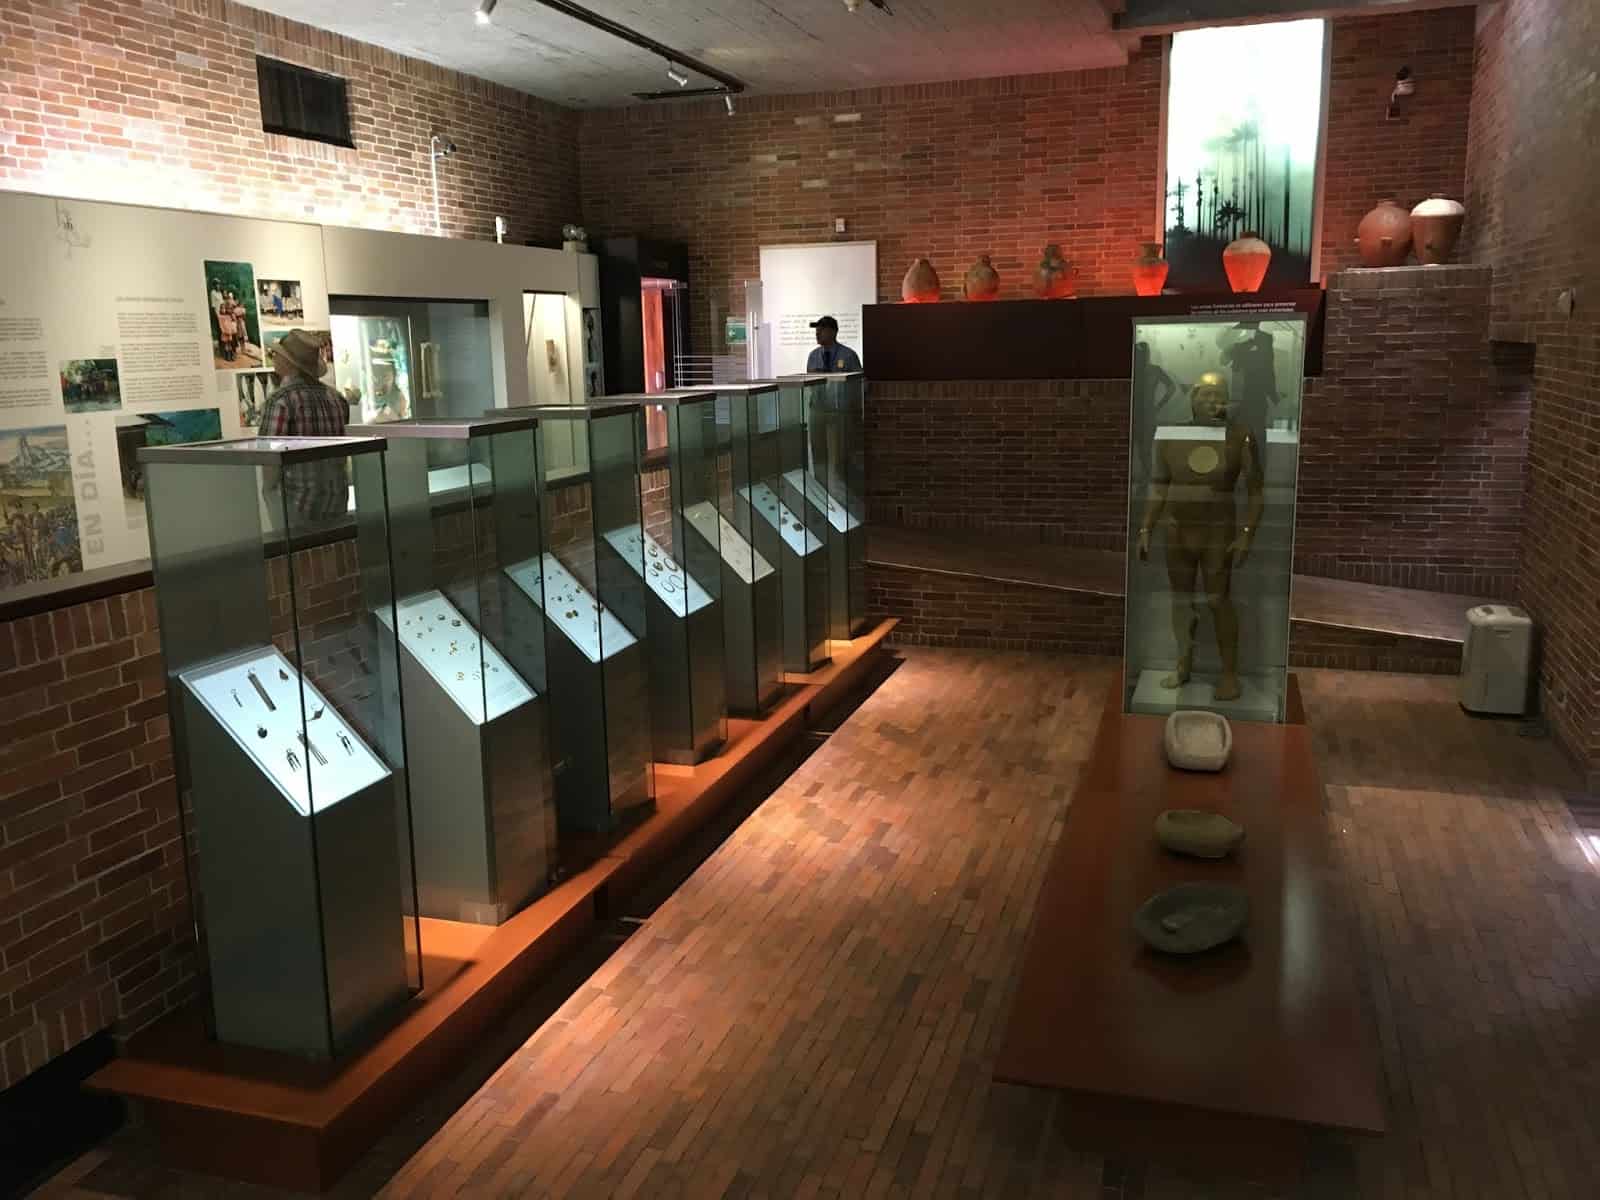 Quimbaya Gold Museum in Armenia, Quindío, Colombia